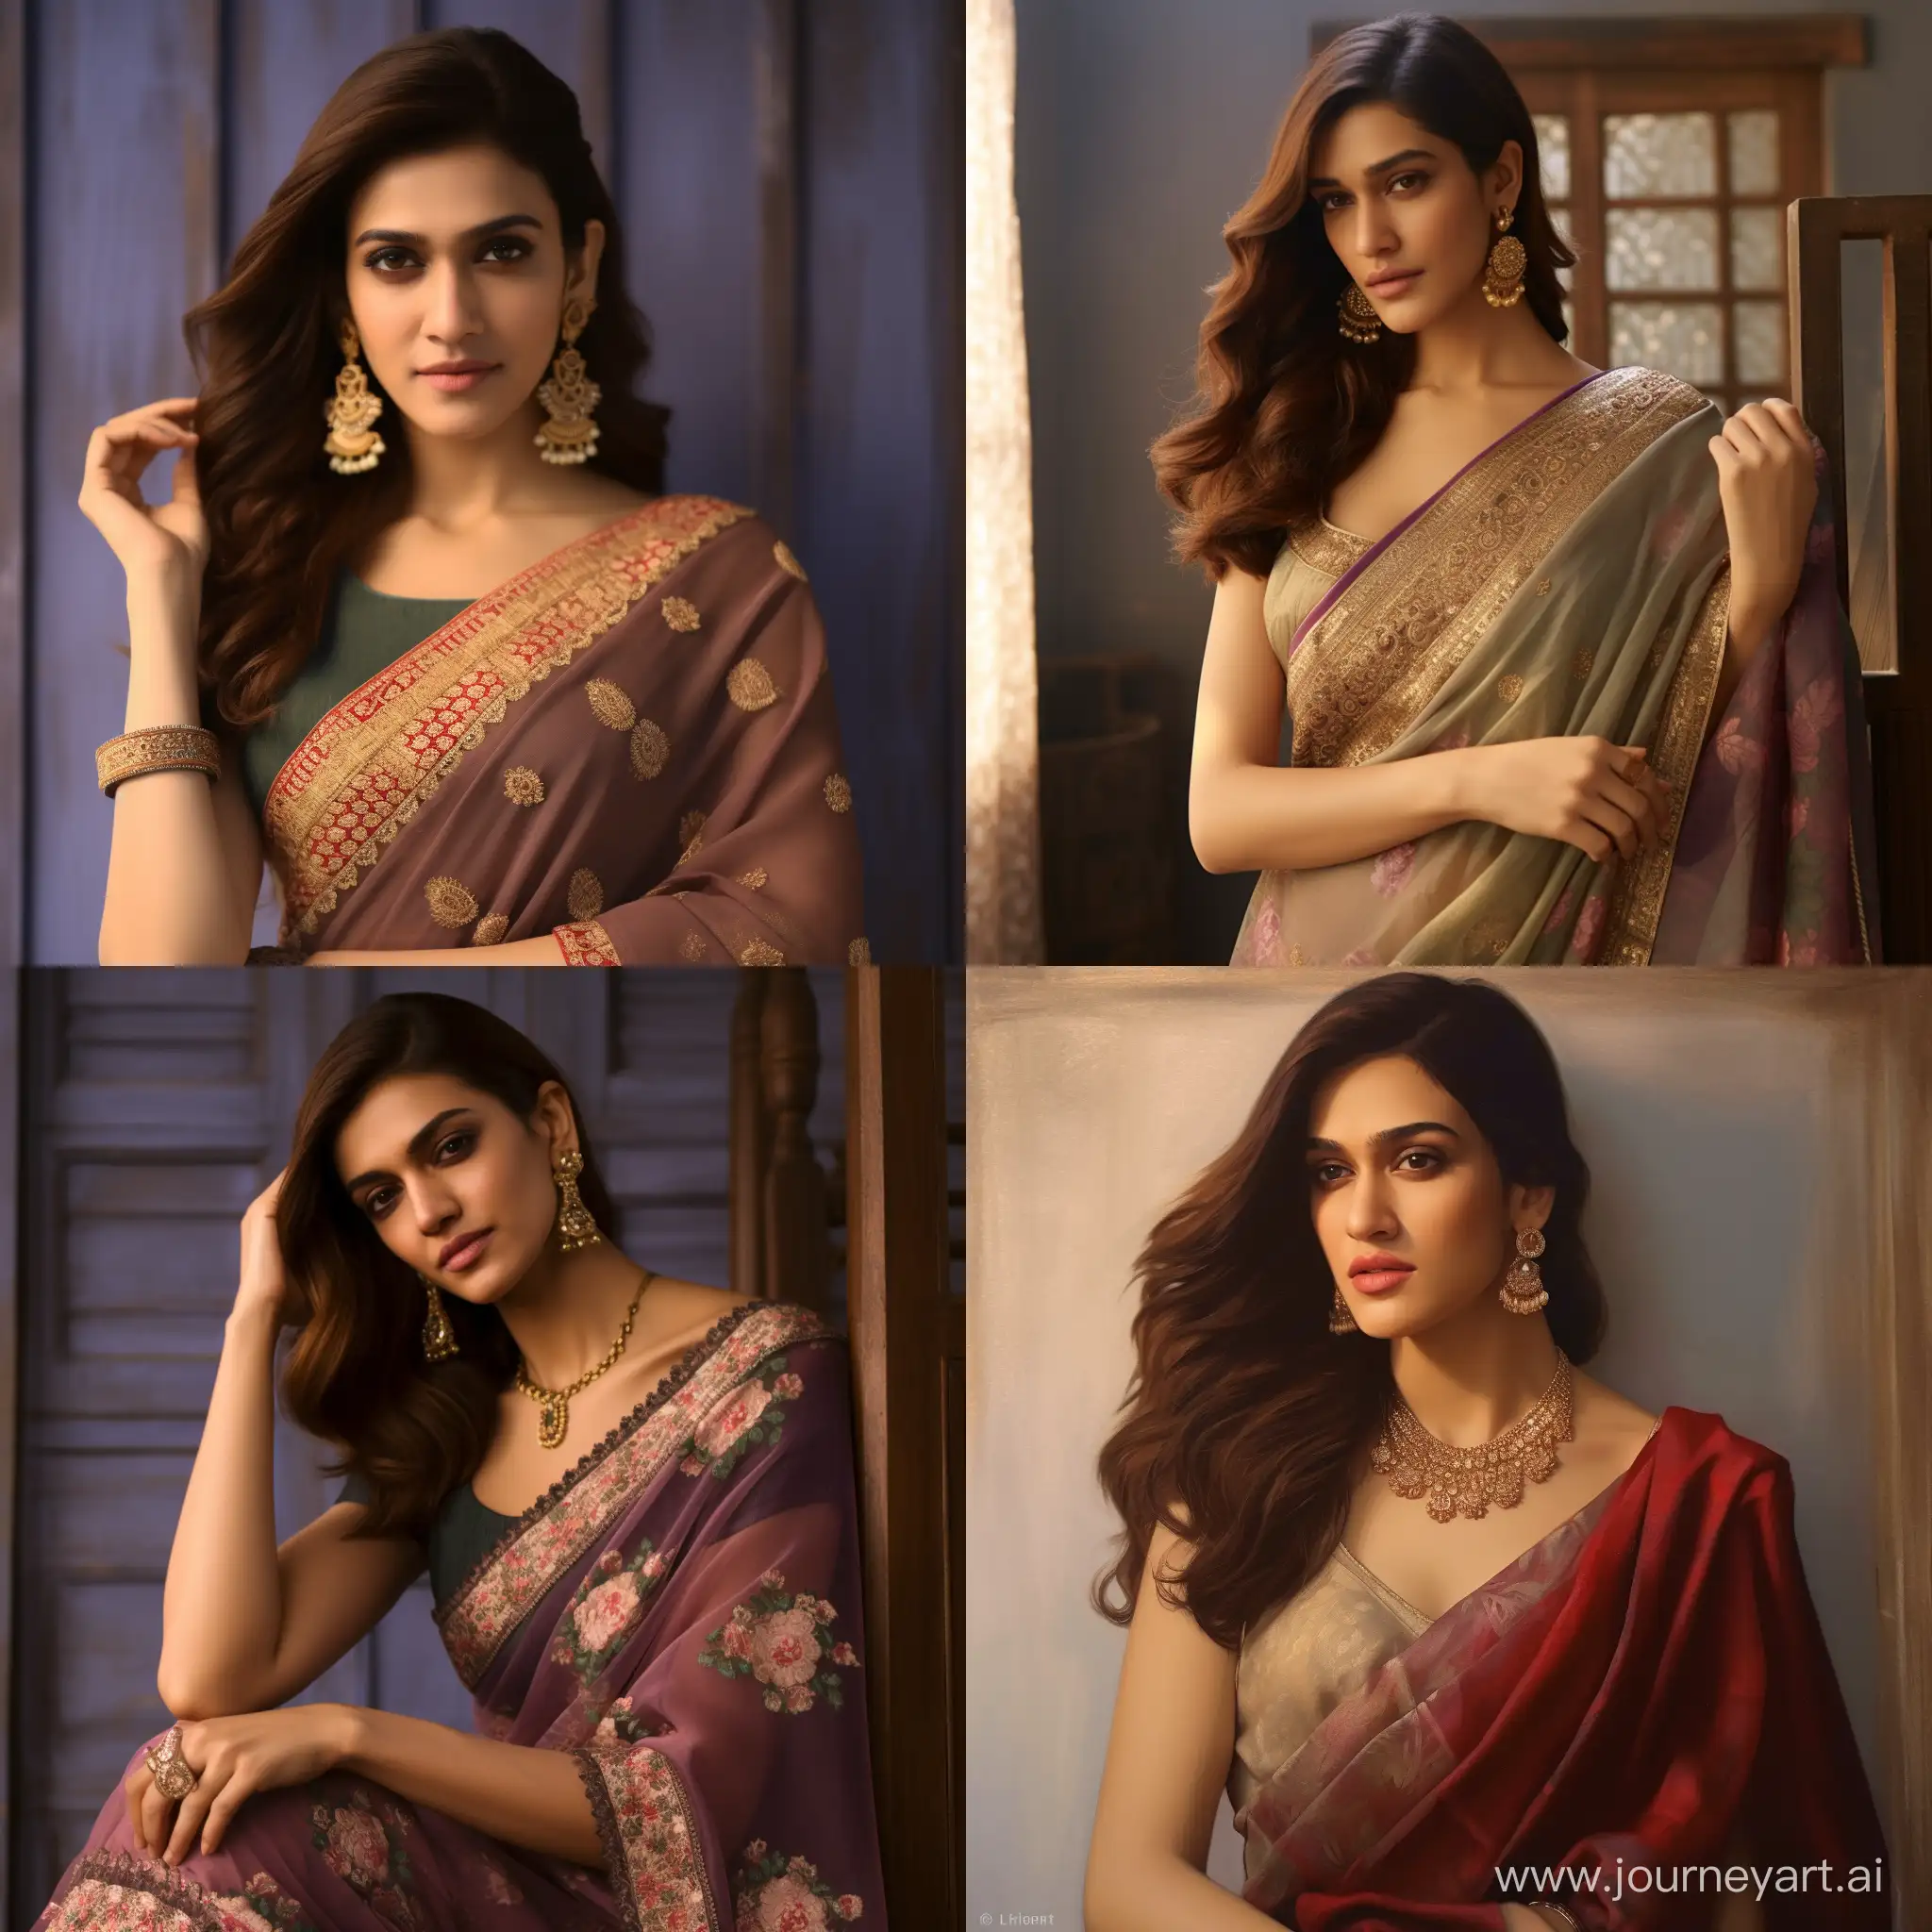 Graceful-Kriti-Sanon-Portrait-in-Saree-Elegance-and-Beauty-Captured-in-a-Romantic-Setting